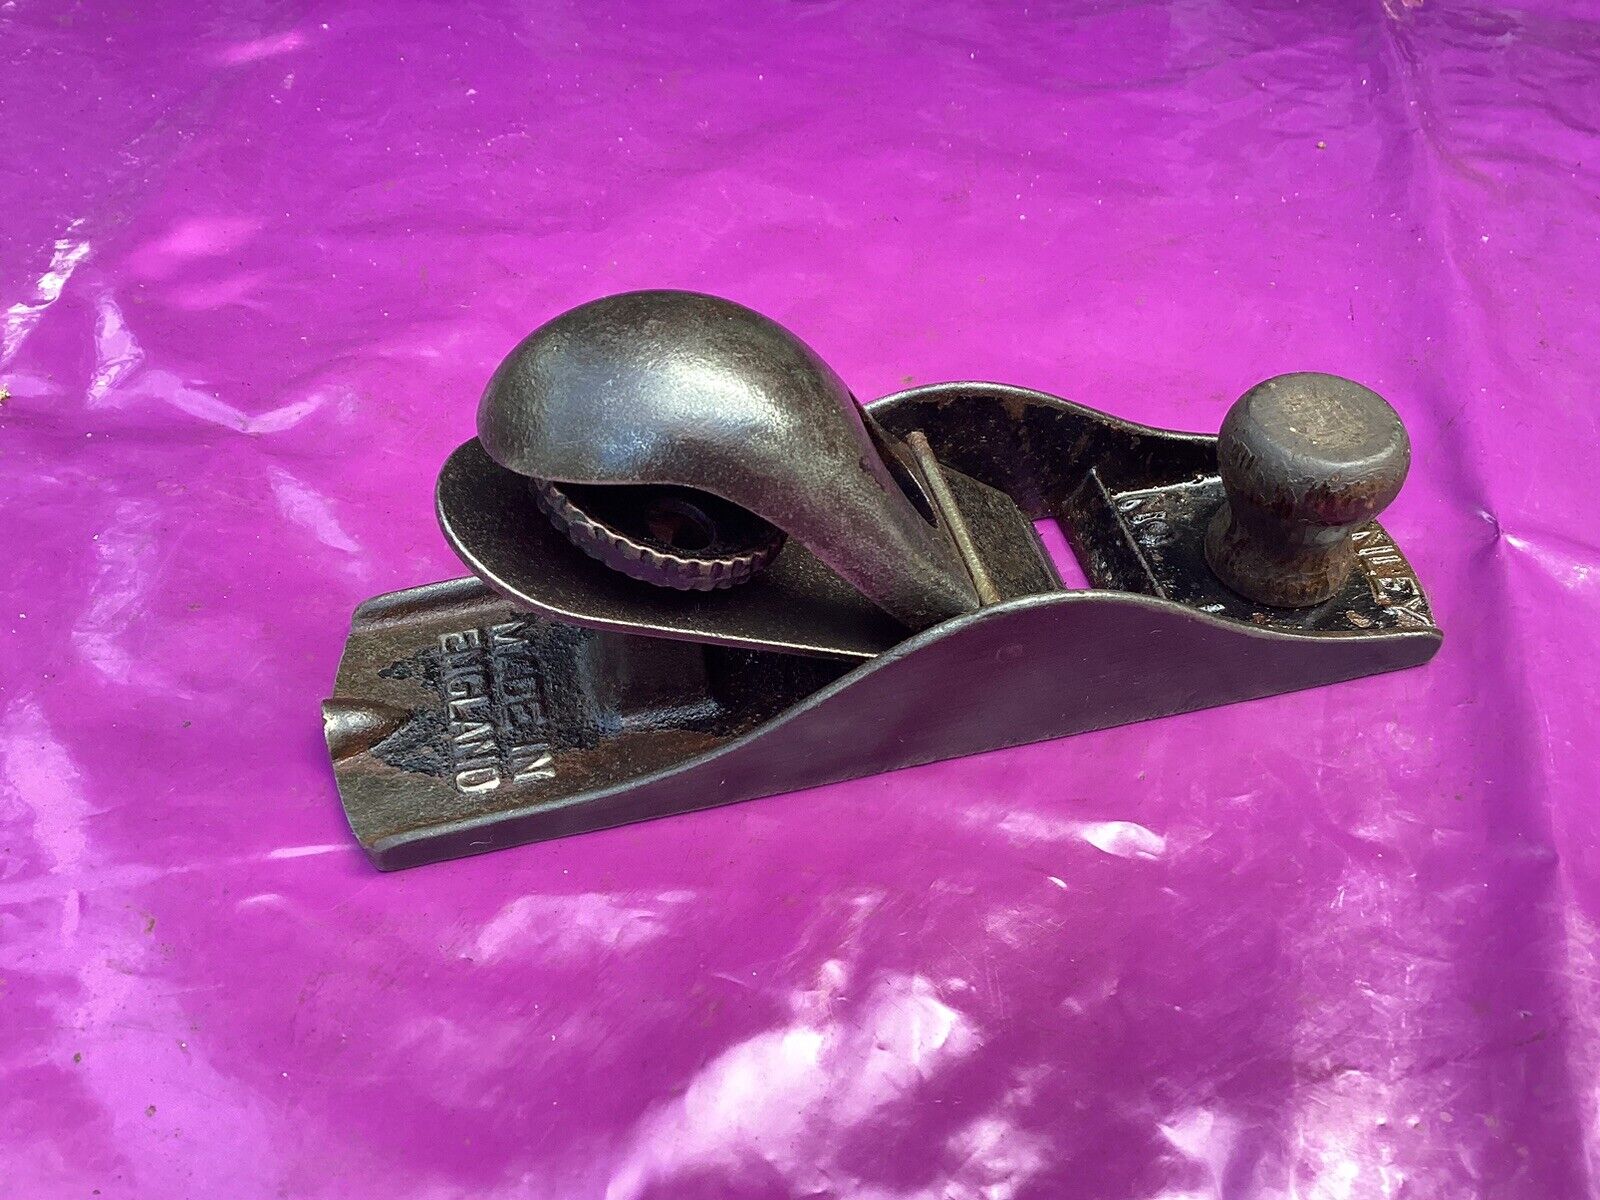 Vintage STANLEY No.110 Block Plane Woodworking Carpenters Old Hand Tools English